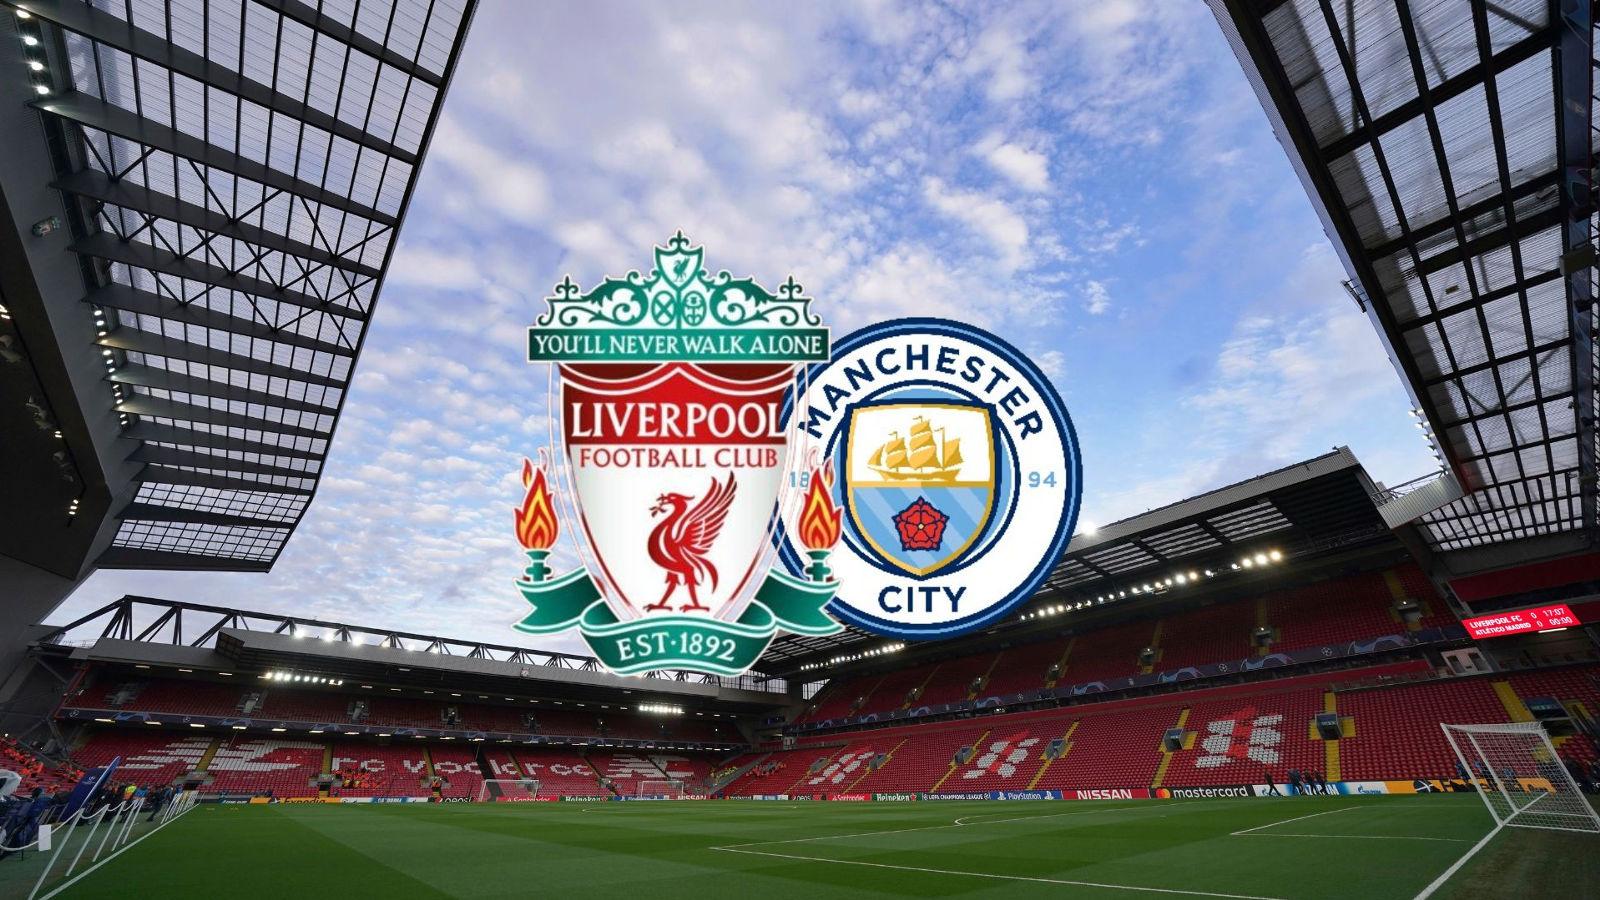 Manchester city - liverpool